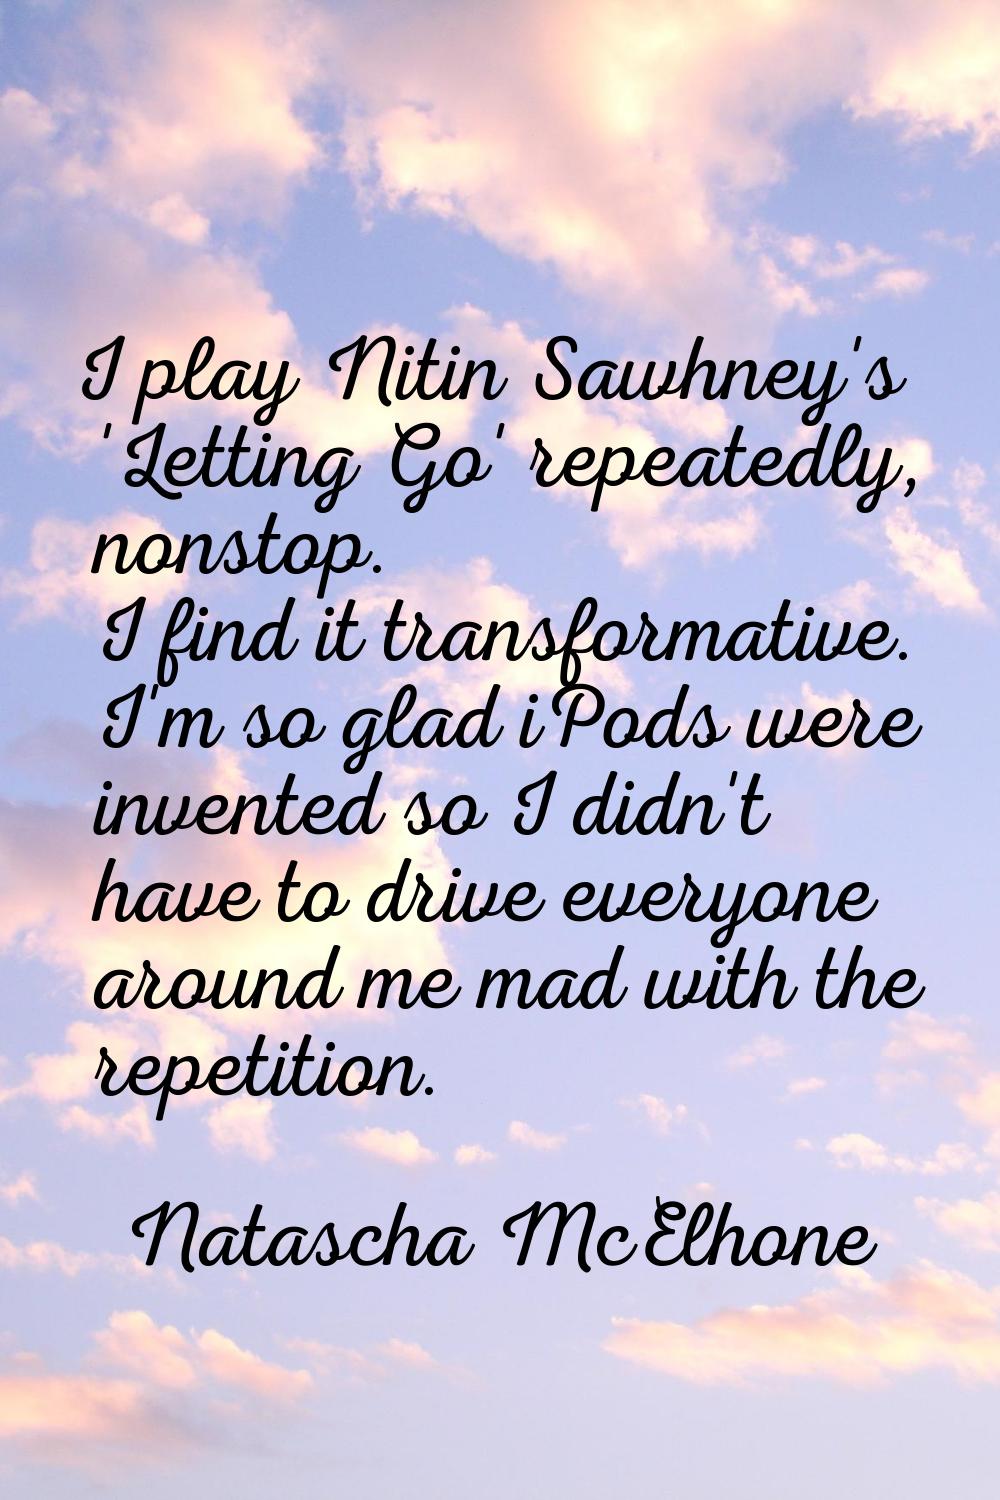 I play Nitin Sawhney's 'Letting Go' repeatedly, nonstop. I find it transformative. I'm so glad iPod